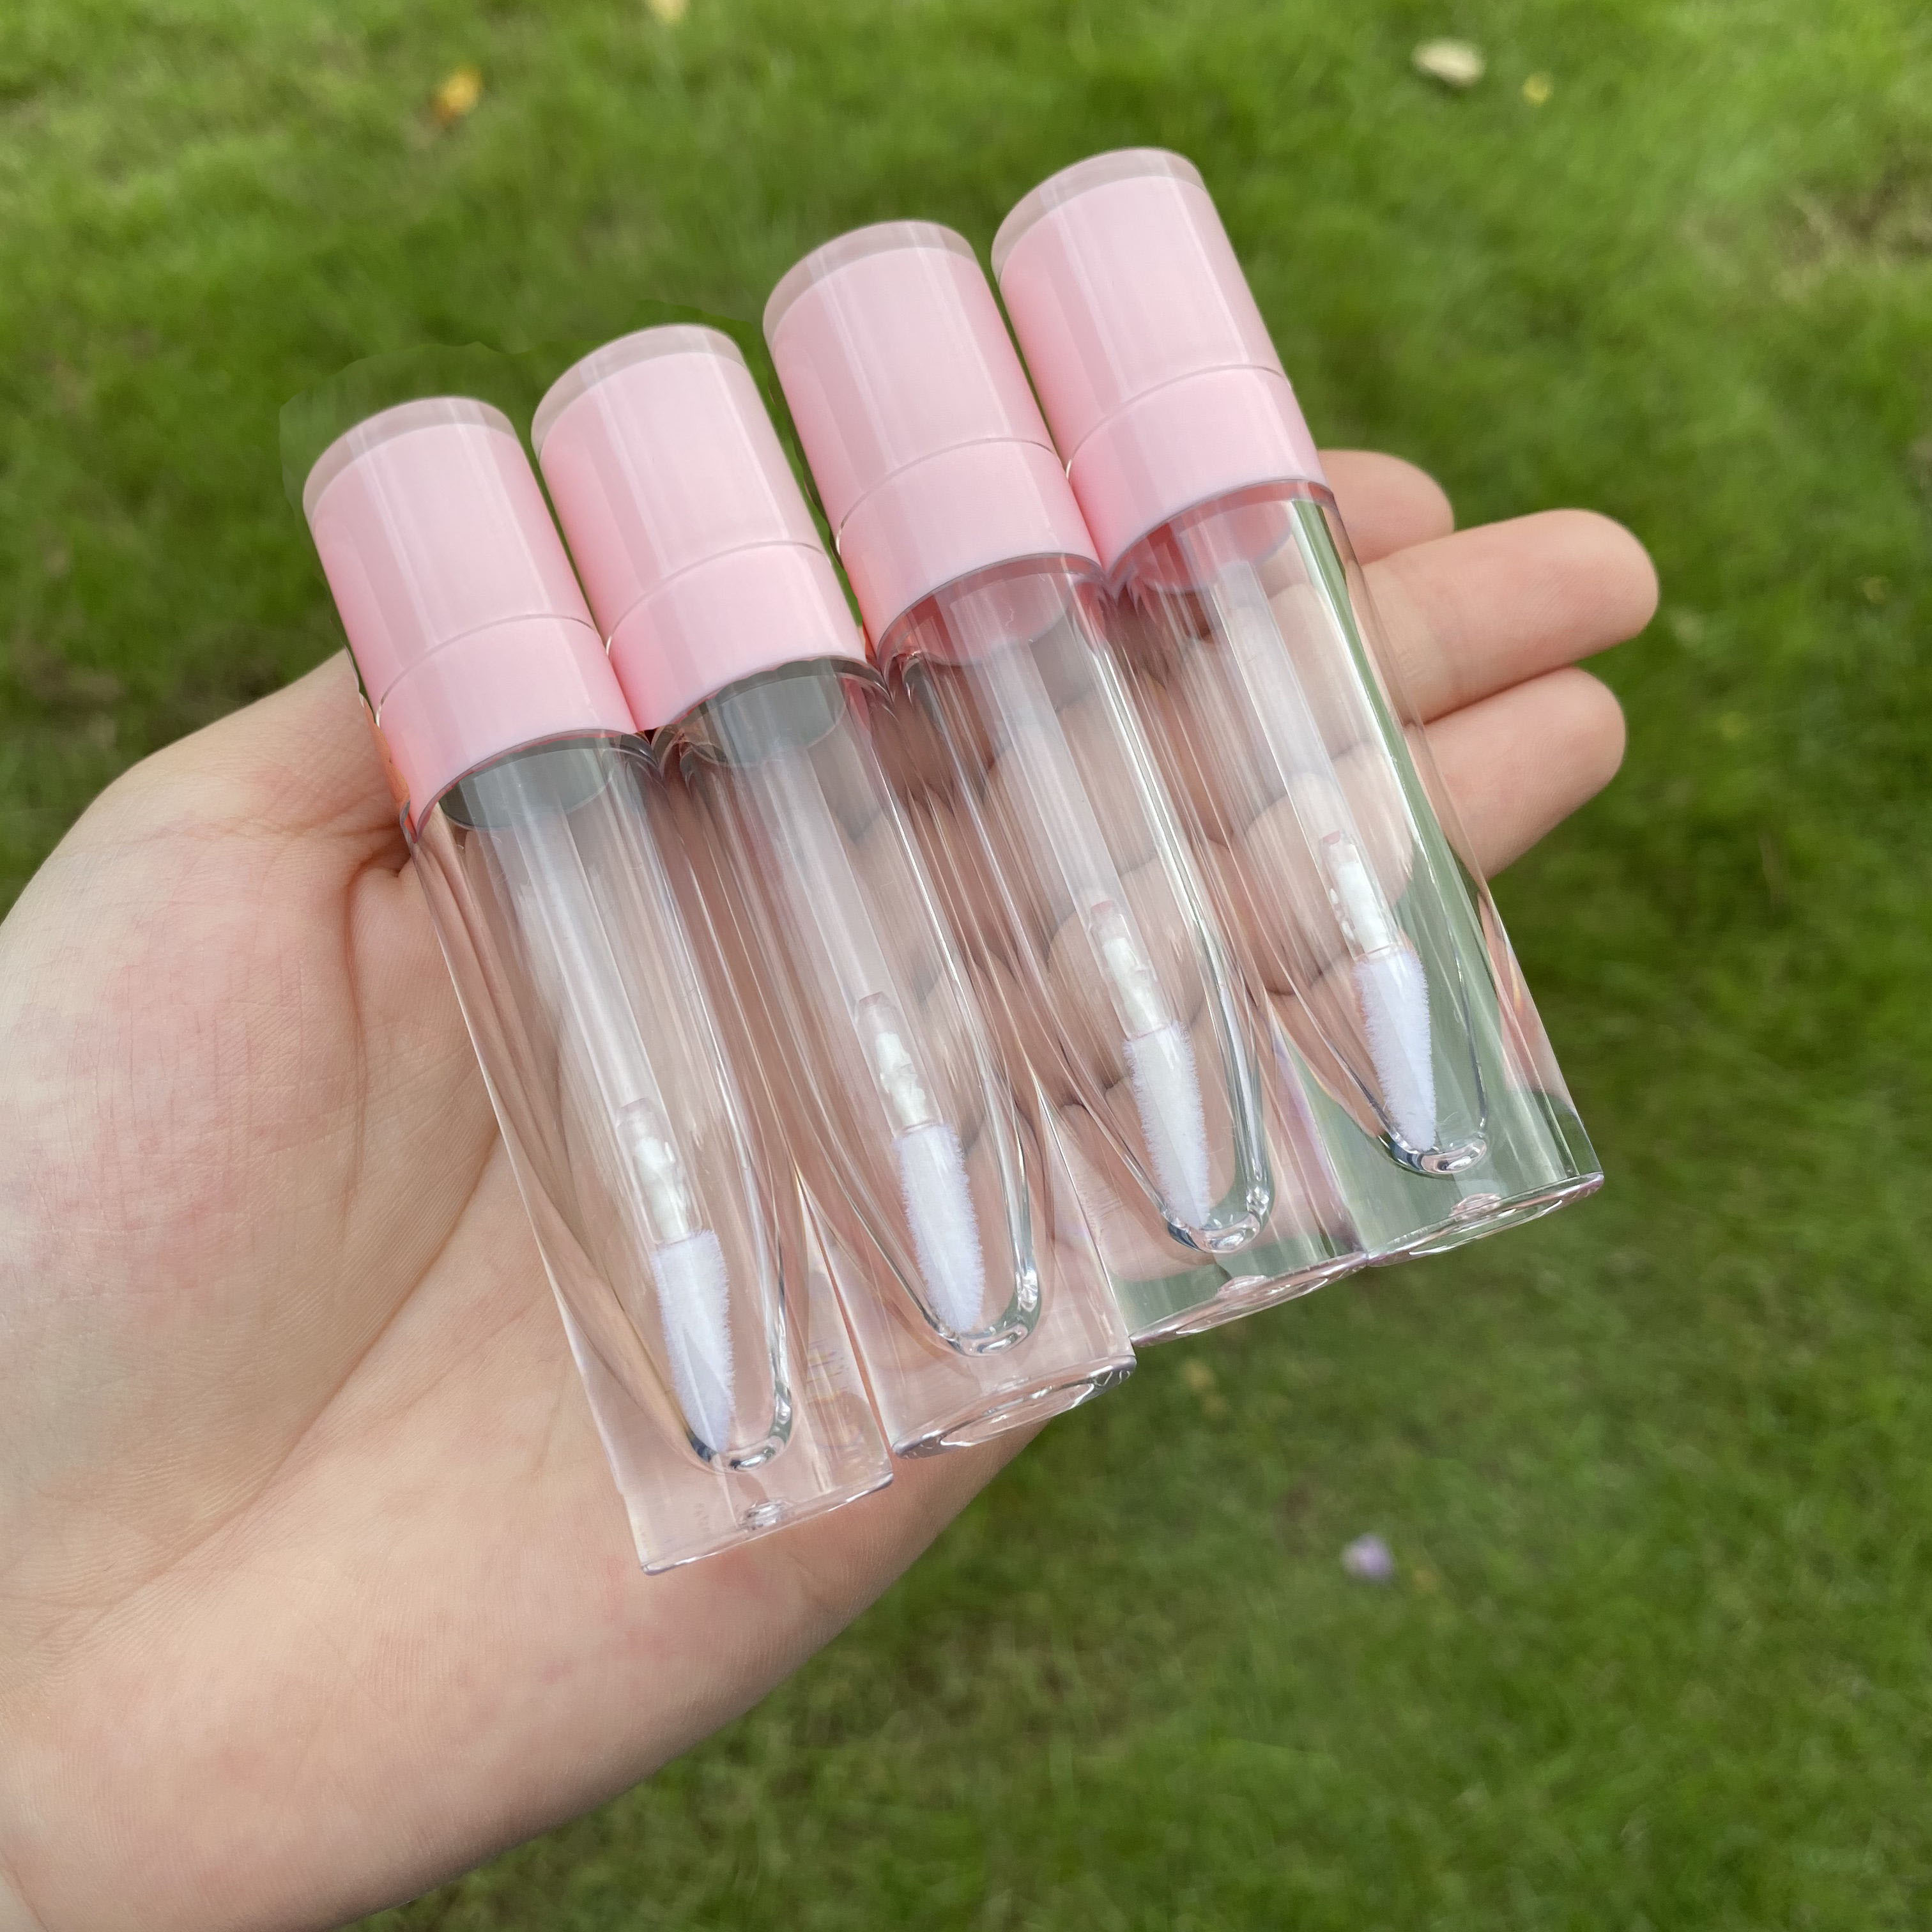 6ML Glass Container Containers - Pink Lid 